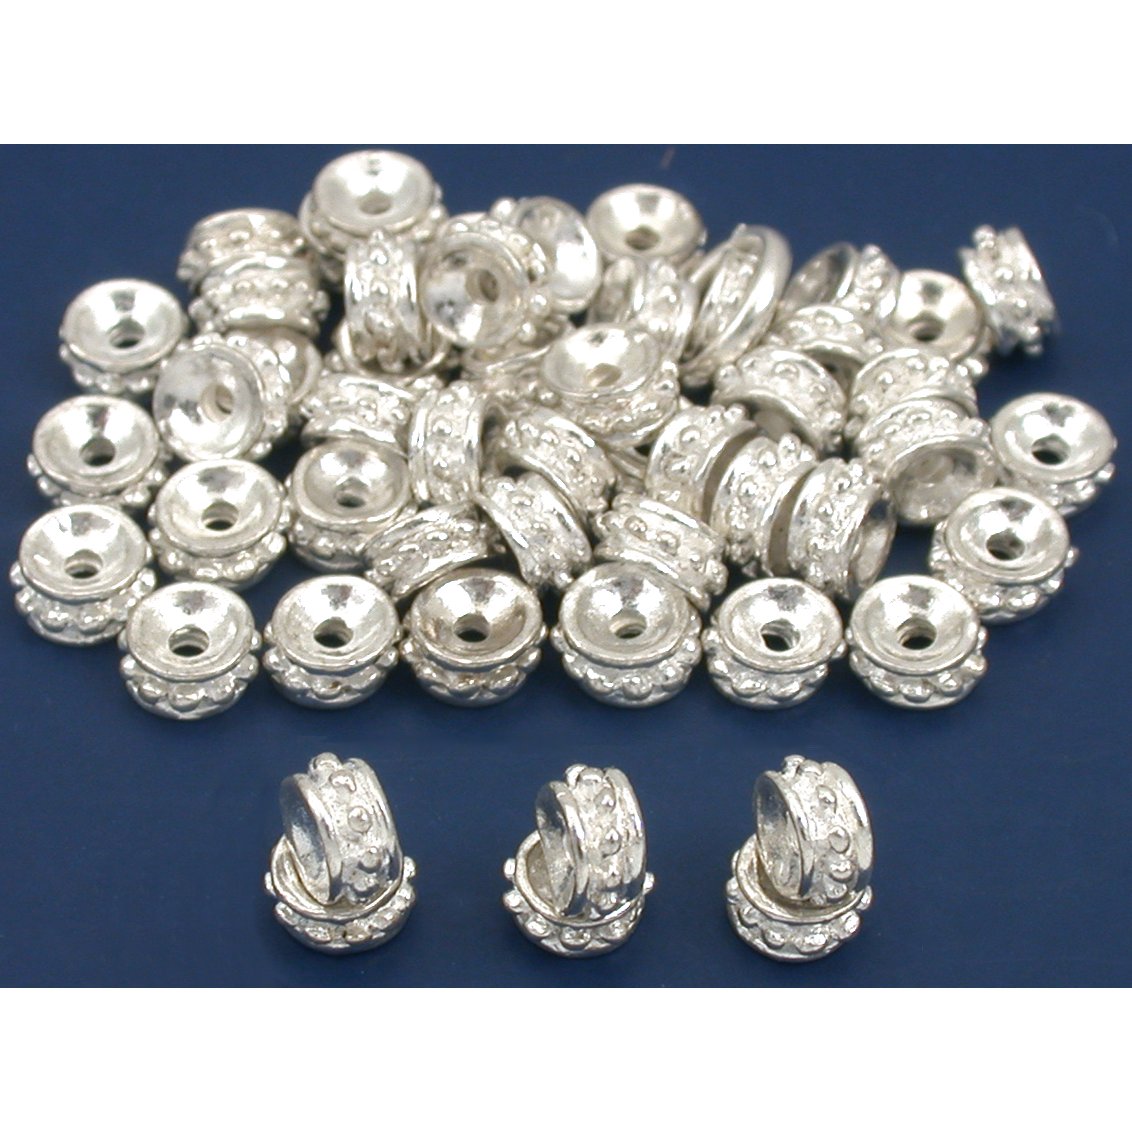 Bali Spacer Beads Silver Plated 6mm 45Pcs Approx.